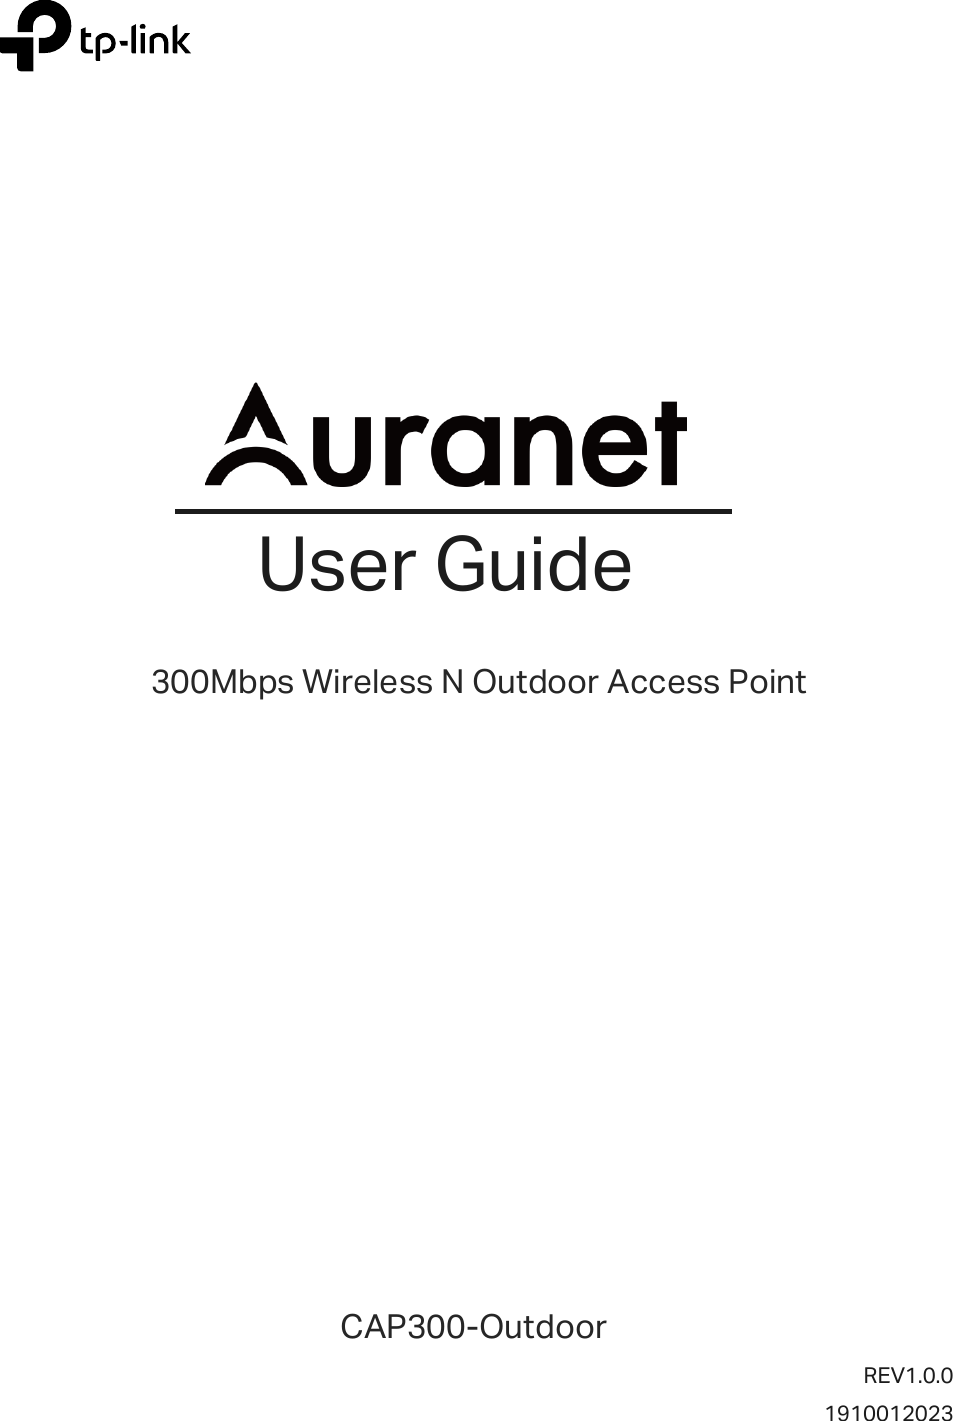      REV1.0.0 1910012023  User Guide 300Mbps Wireless N Outdoor Access Point CAP300-Outdoor        